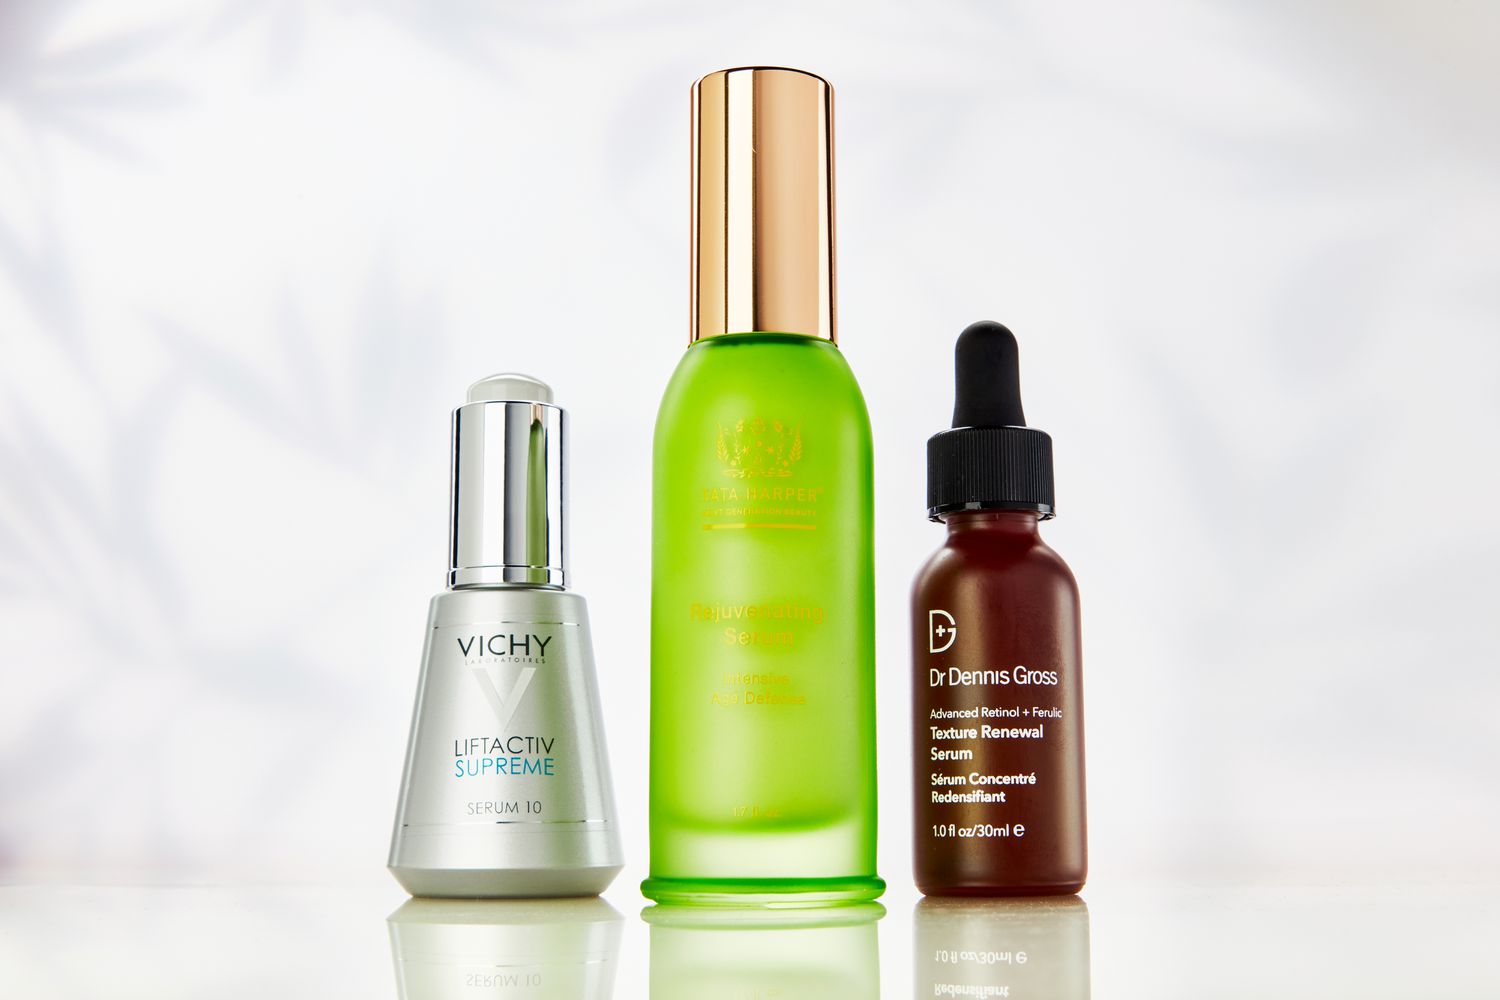 The 10 Best Anti-Aging Serums, According to Experts